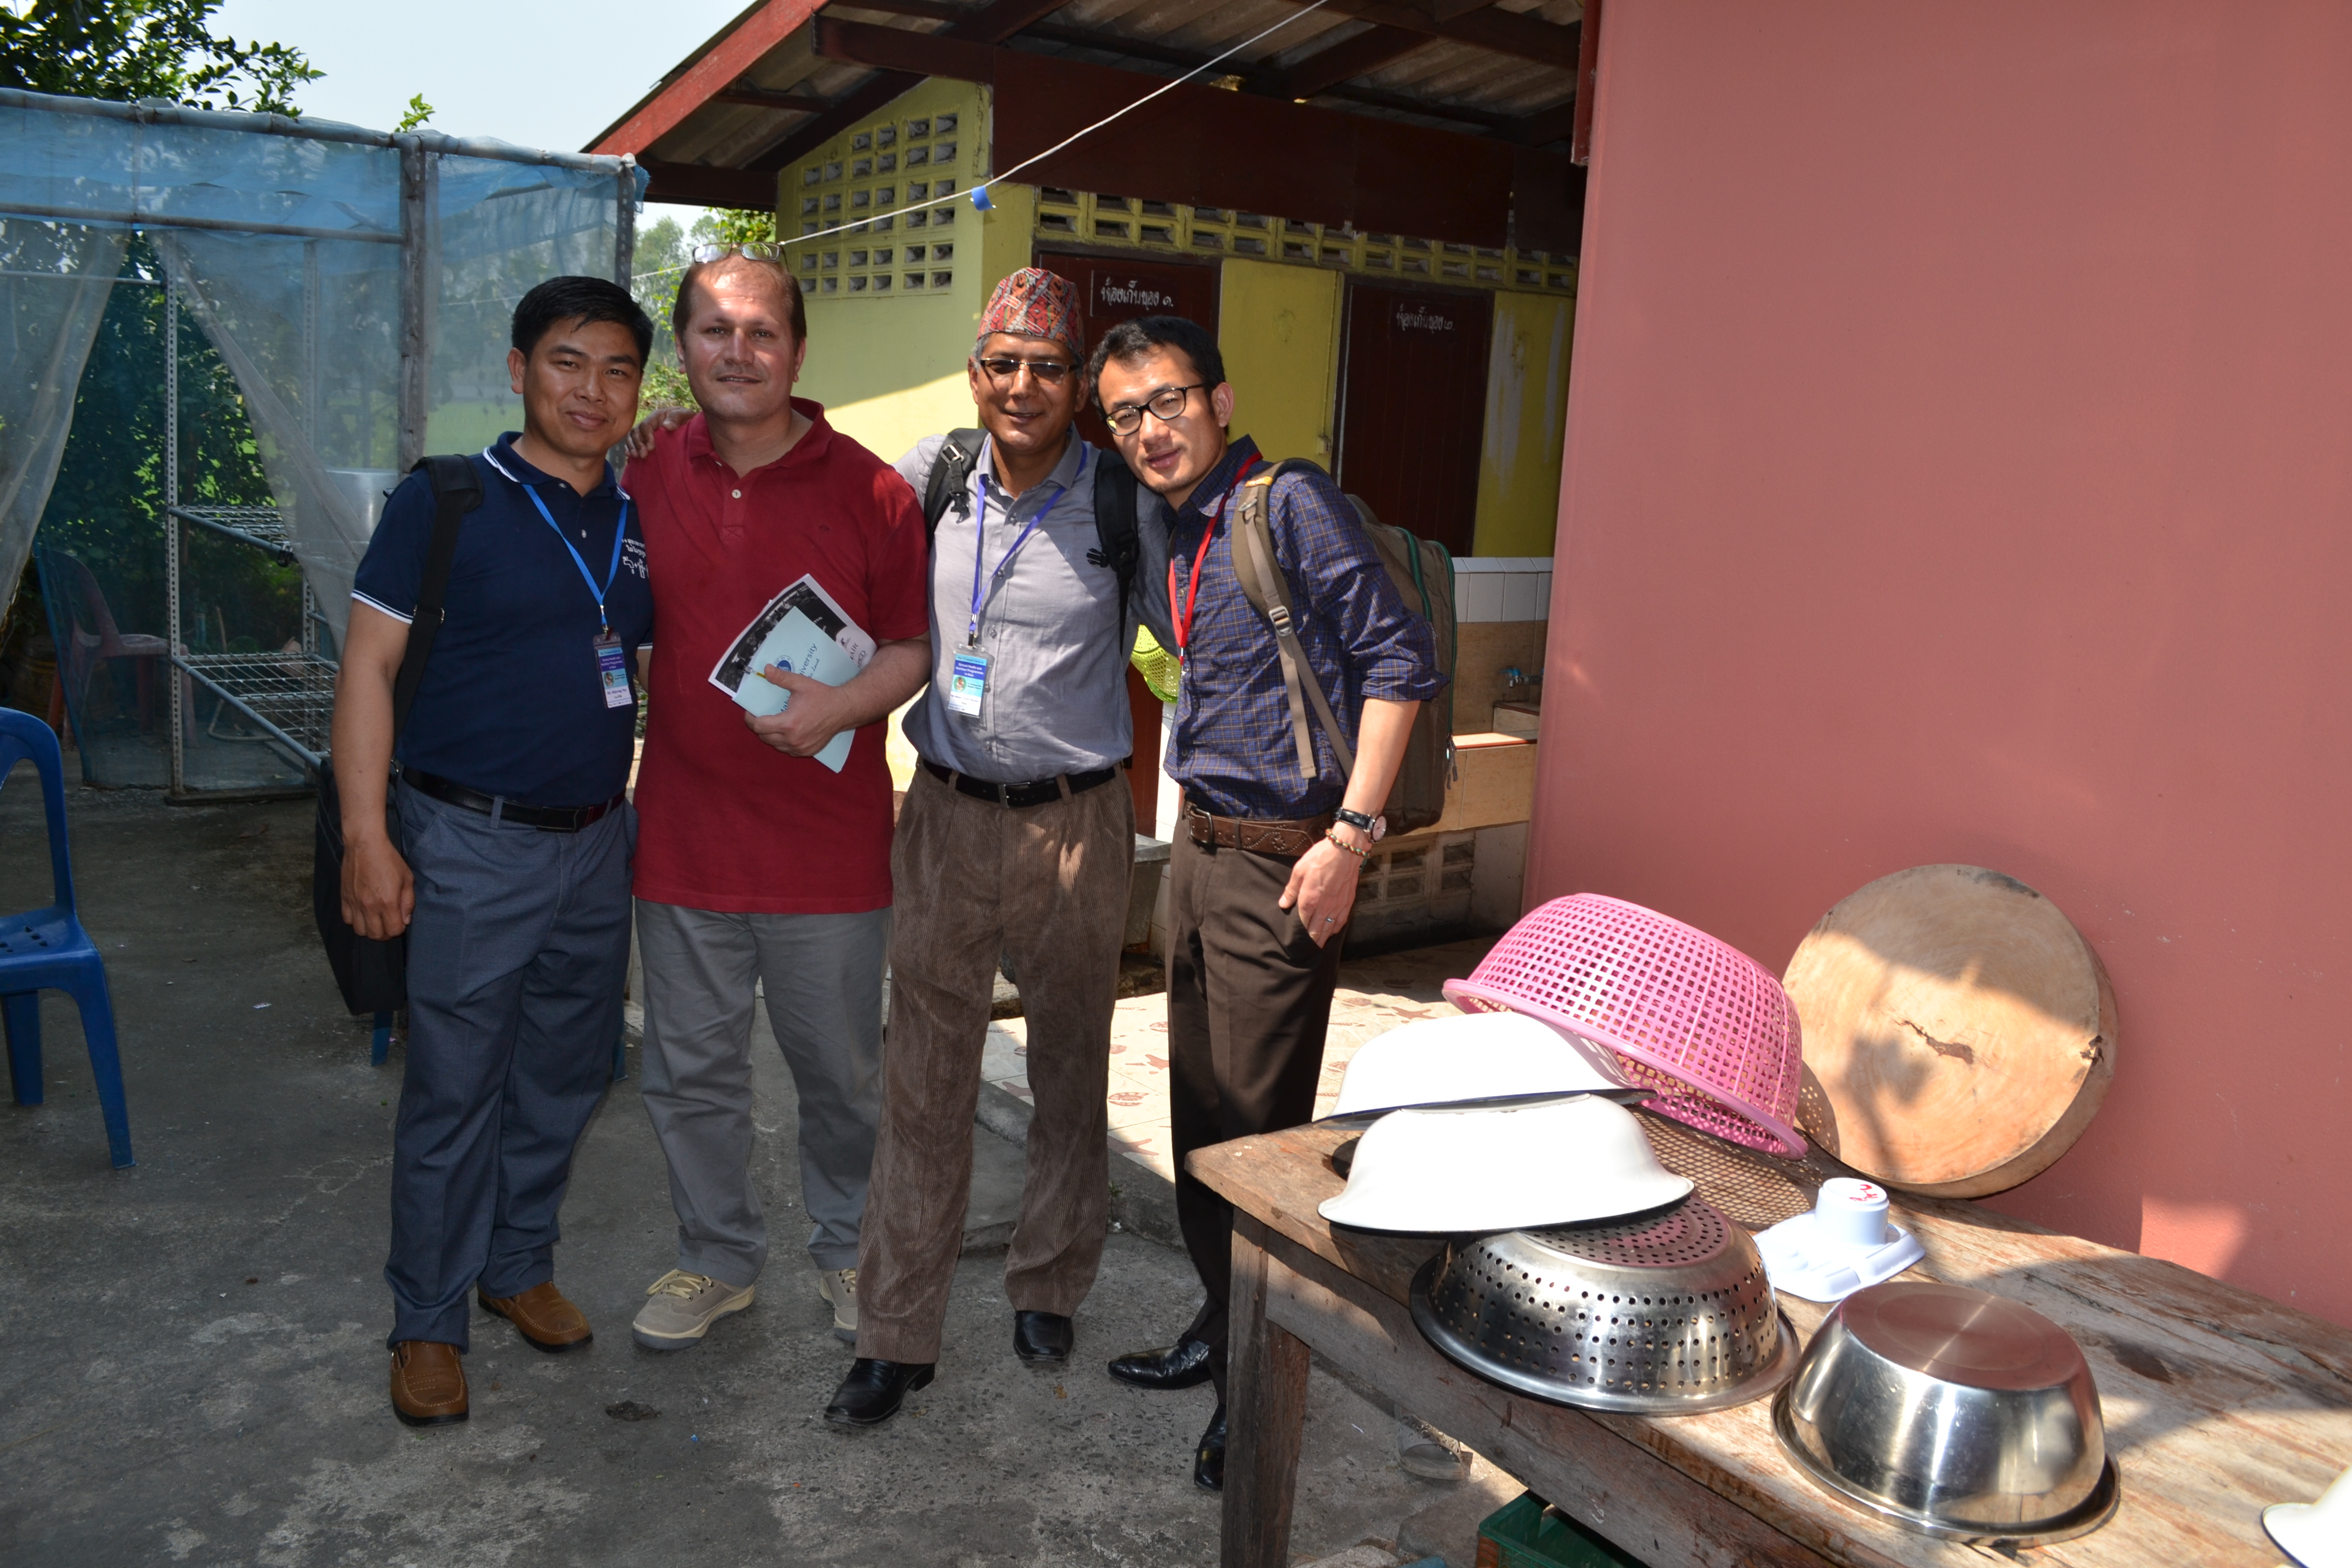 Bhutan's Sangay Thinley (R) on a school visit with colleagues from Nepal, Pakistan and Cambodia